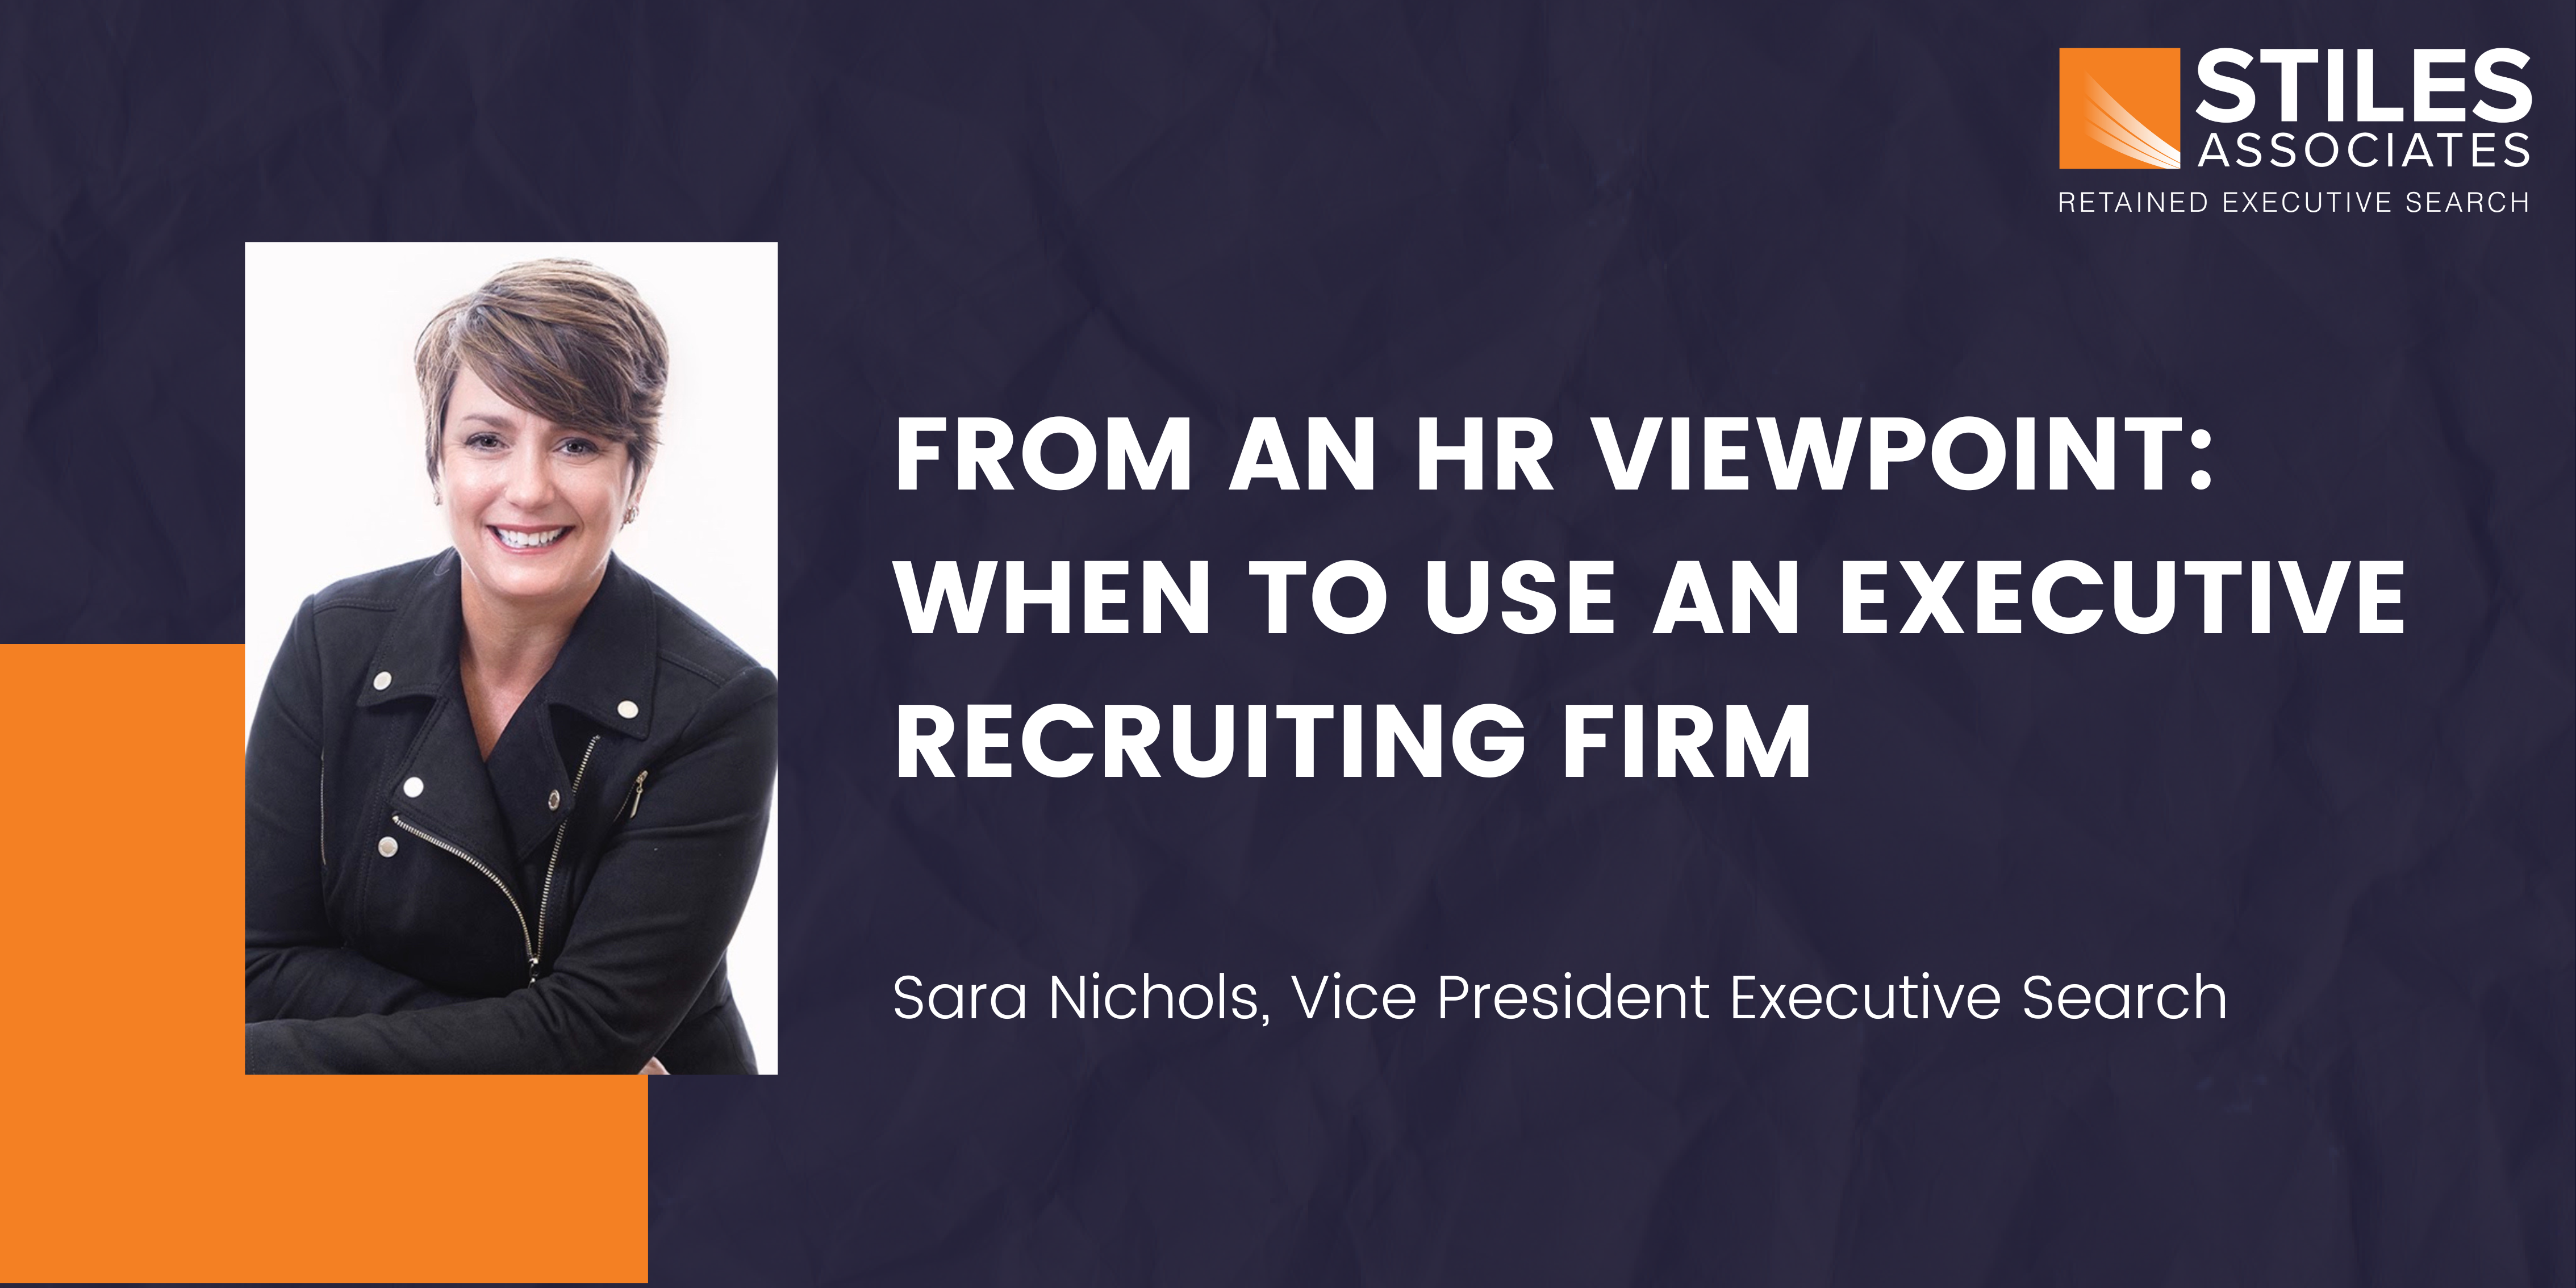 From an HR viewpoint When to use an executive recruiting firm